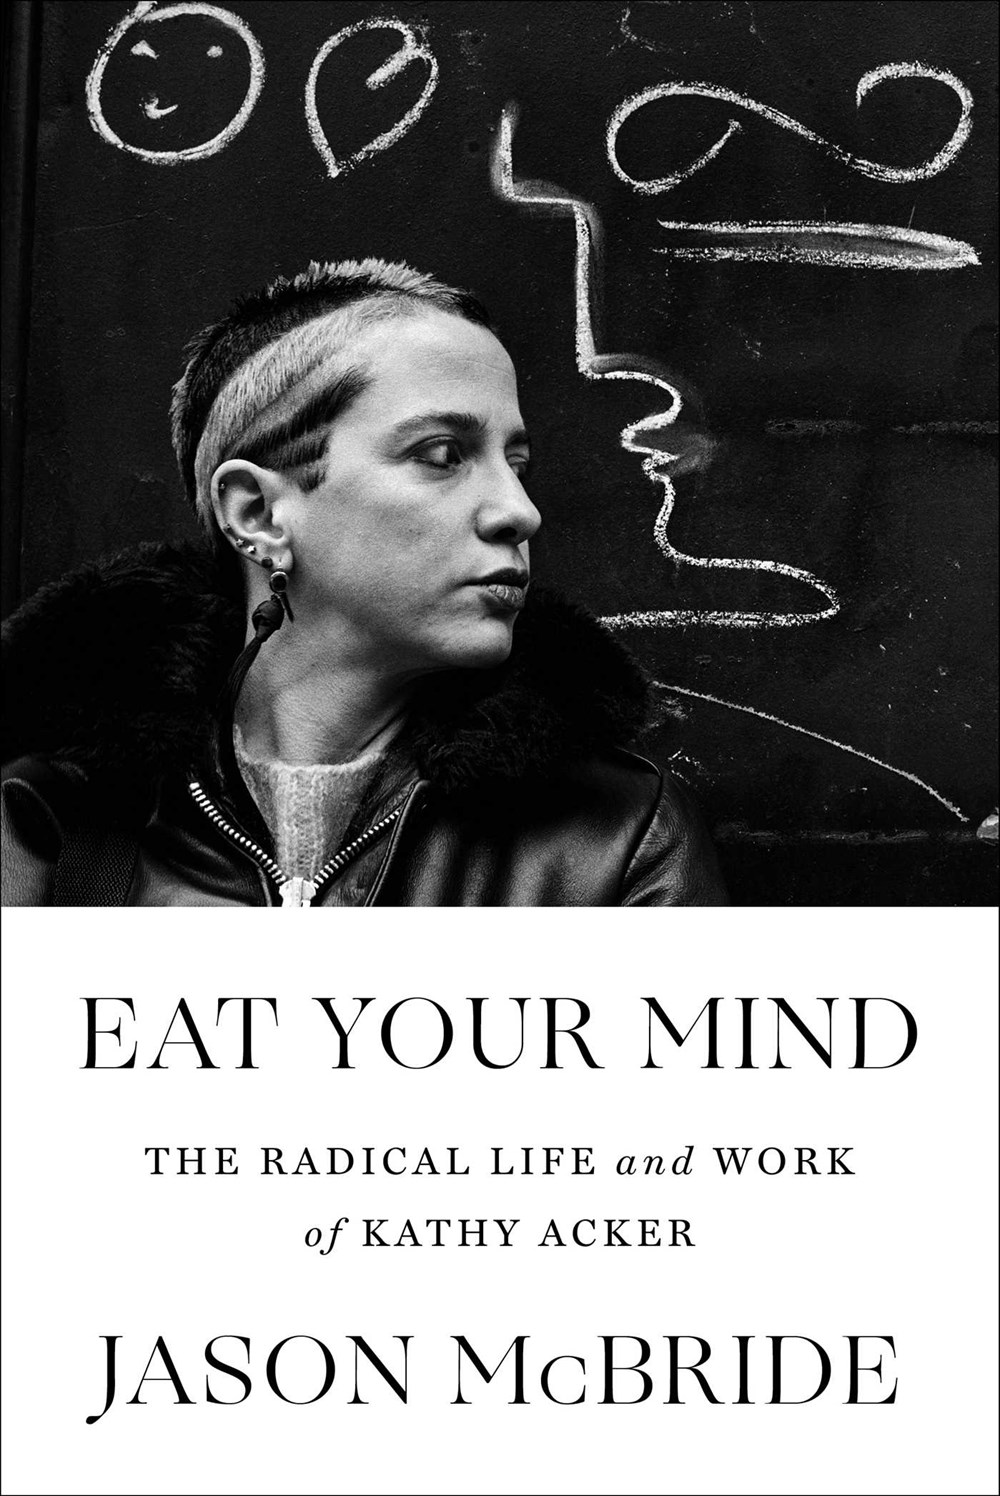 The cover for Jason McBride's 'Eat Your Mind'.